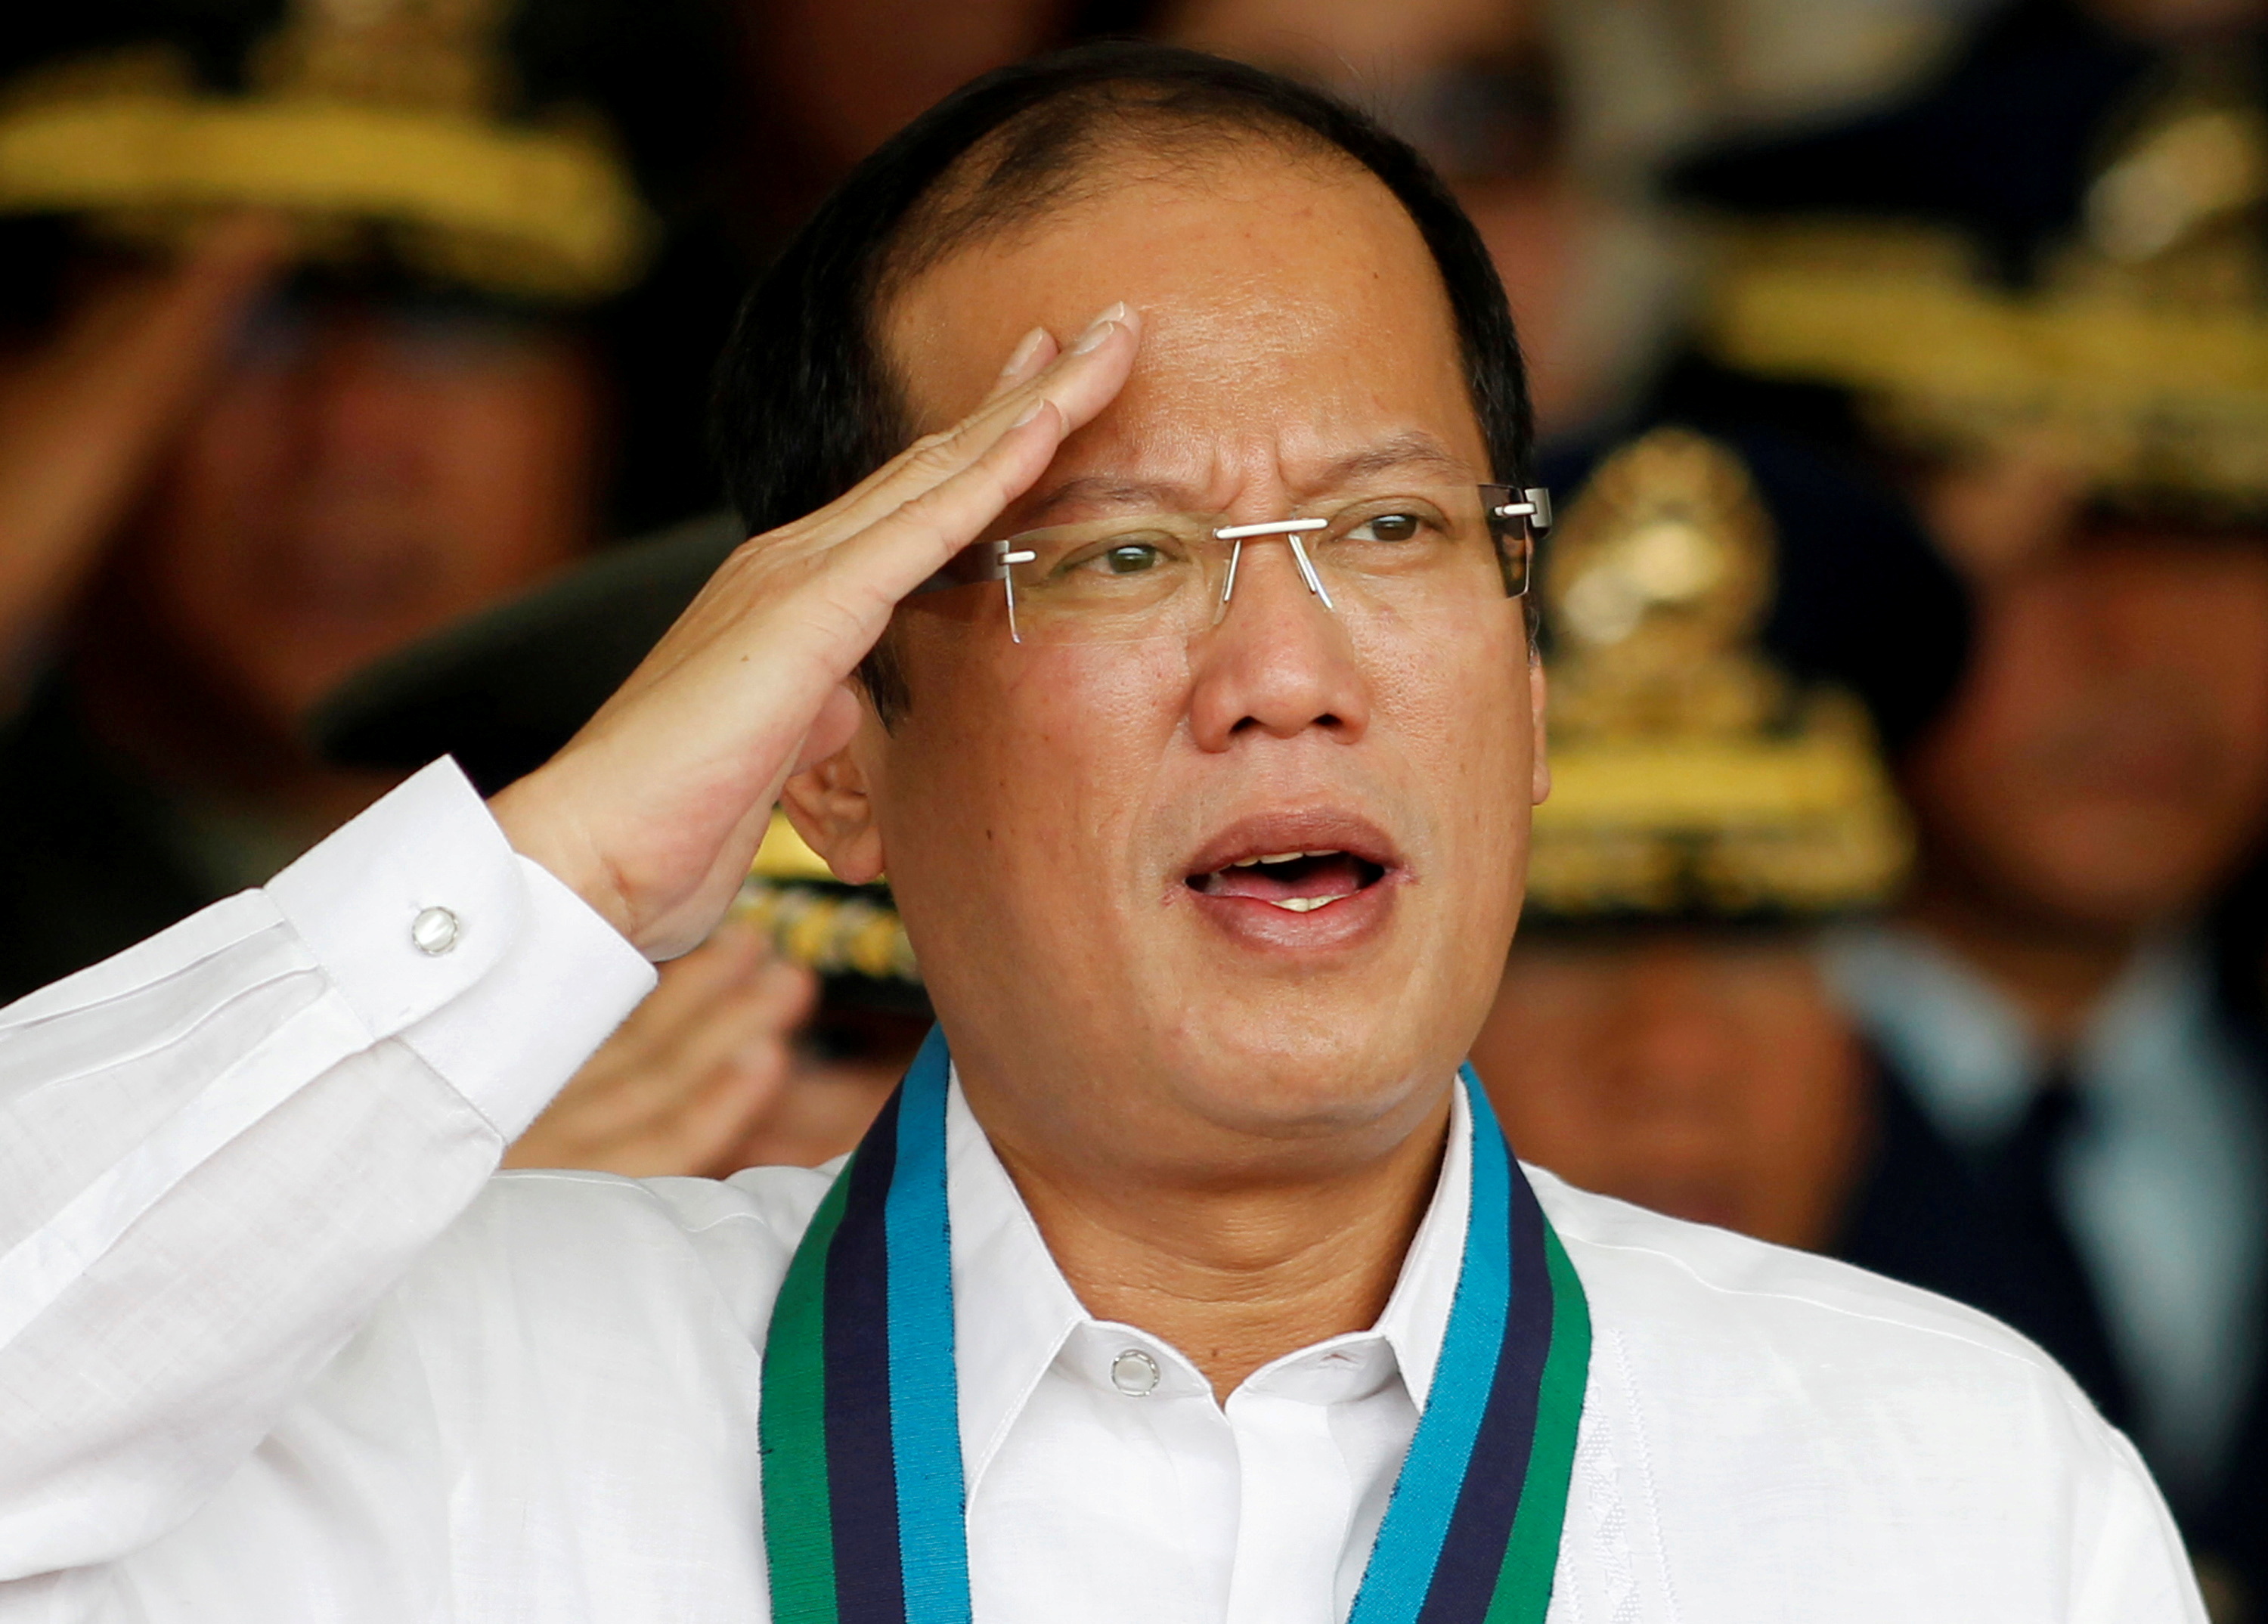 FILE PHOTO - Philippine President Aquino salutes while singing the national anthem during a handover ceremony for the new armed forces chief at Camp Aguinaldo